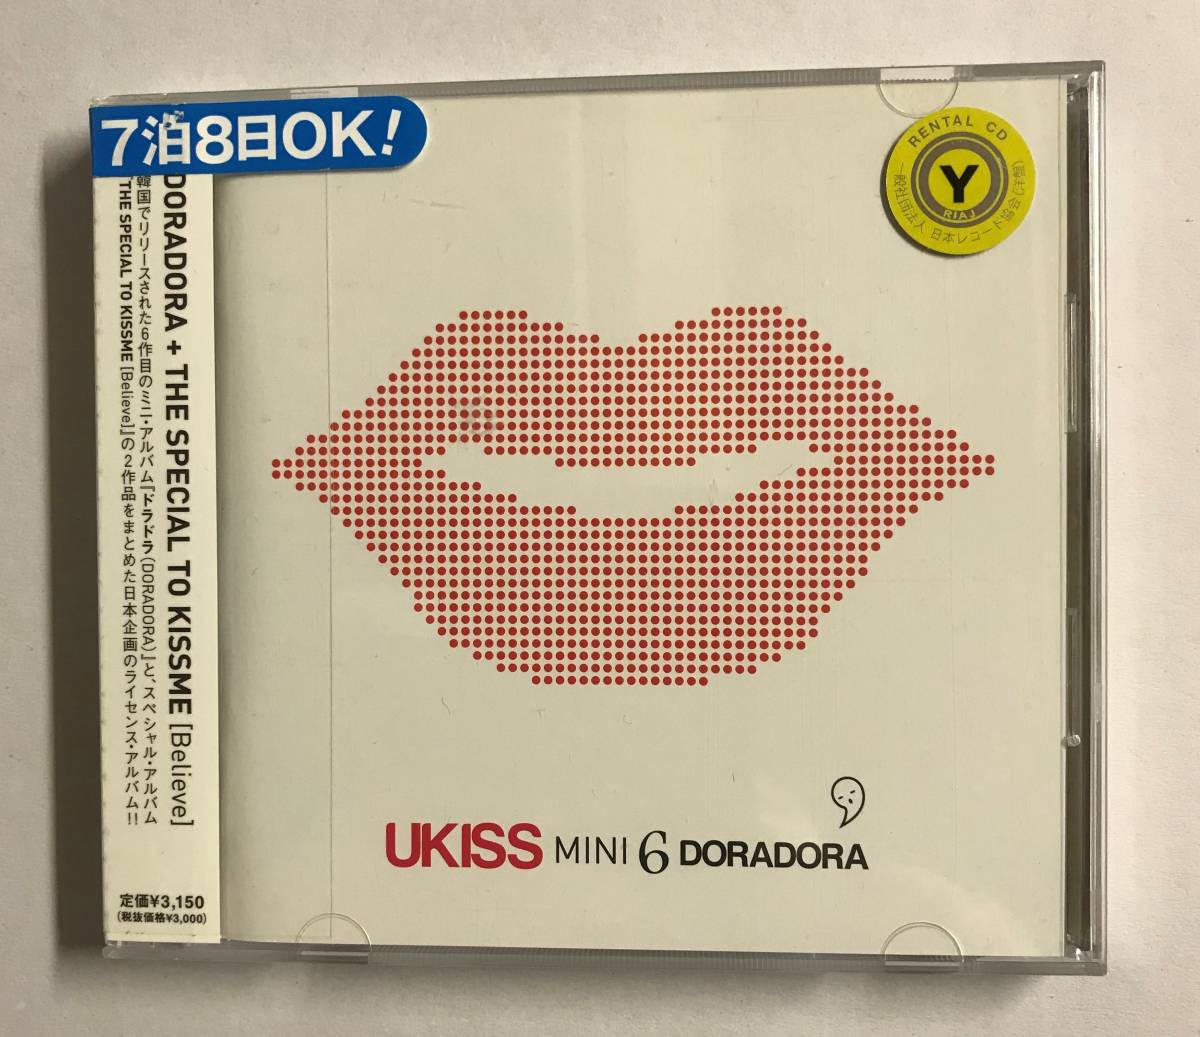 Cd Doradora The Special To Kissme Bellieve 日本ライセンス版 U Kiss レンタル落ち Cd 04 Product Details Yahoo Auctions Japan Proxy Bidding And Shopping Service From Japan